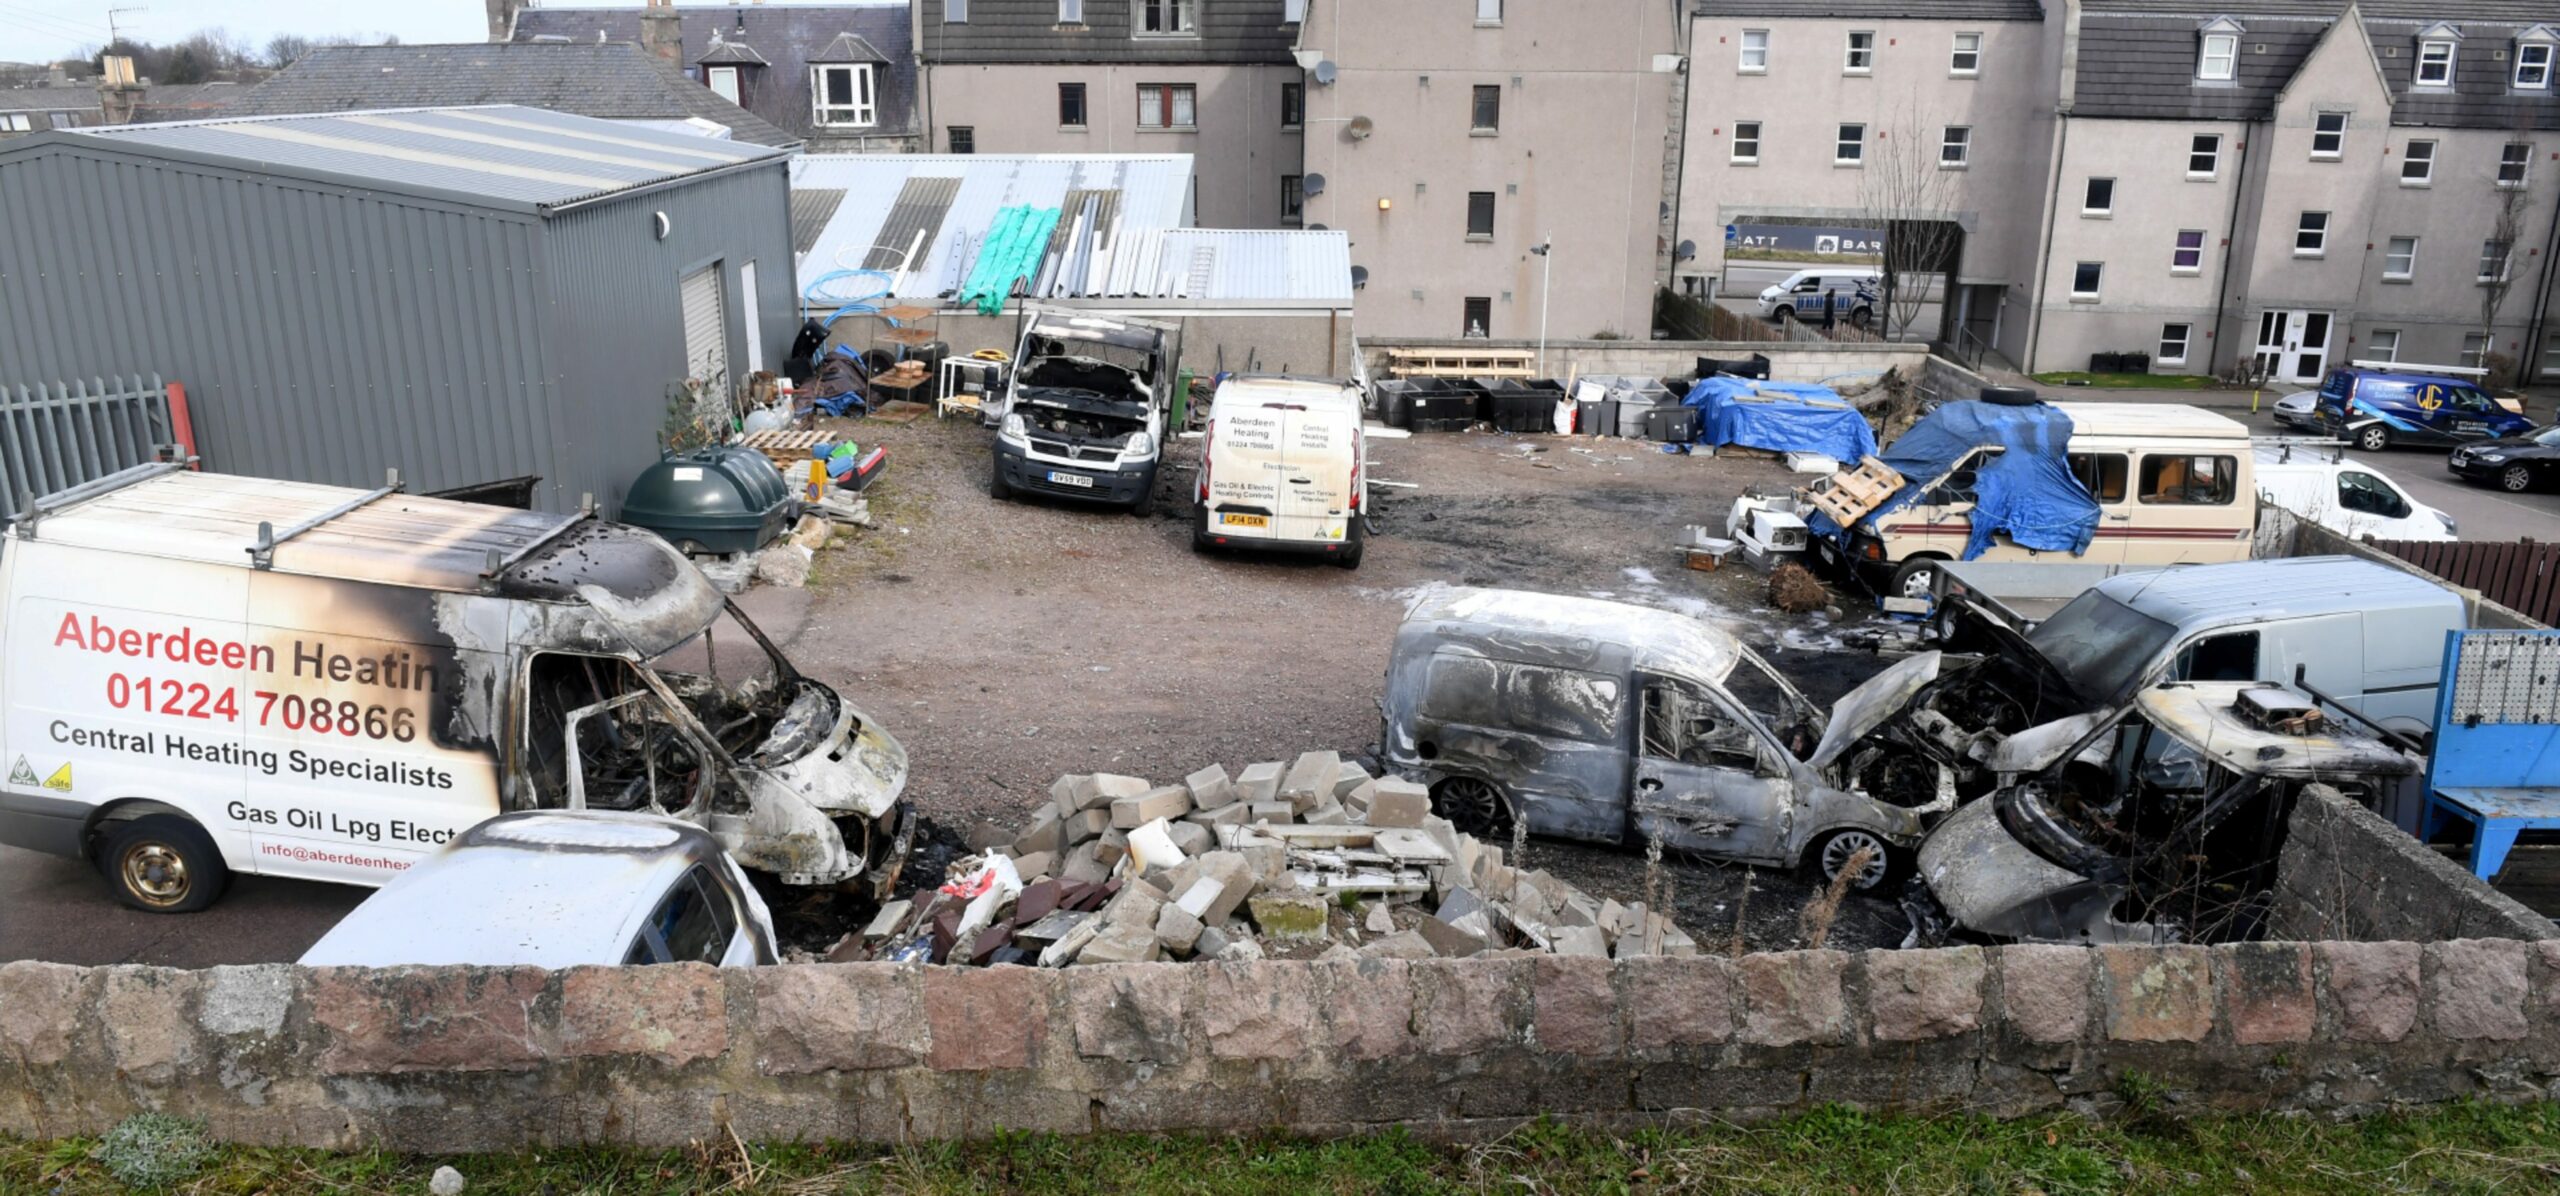 The aftermath of the fire  at Aberdeen Heating Limited